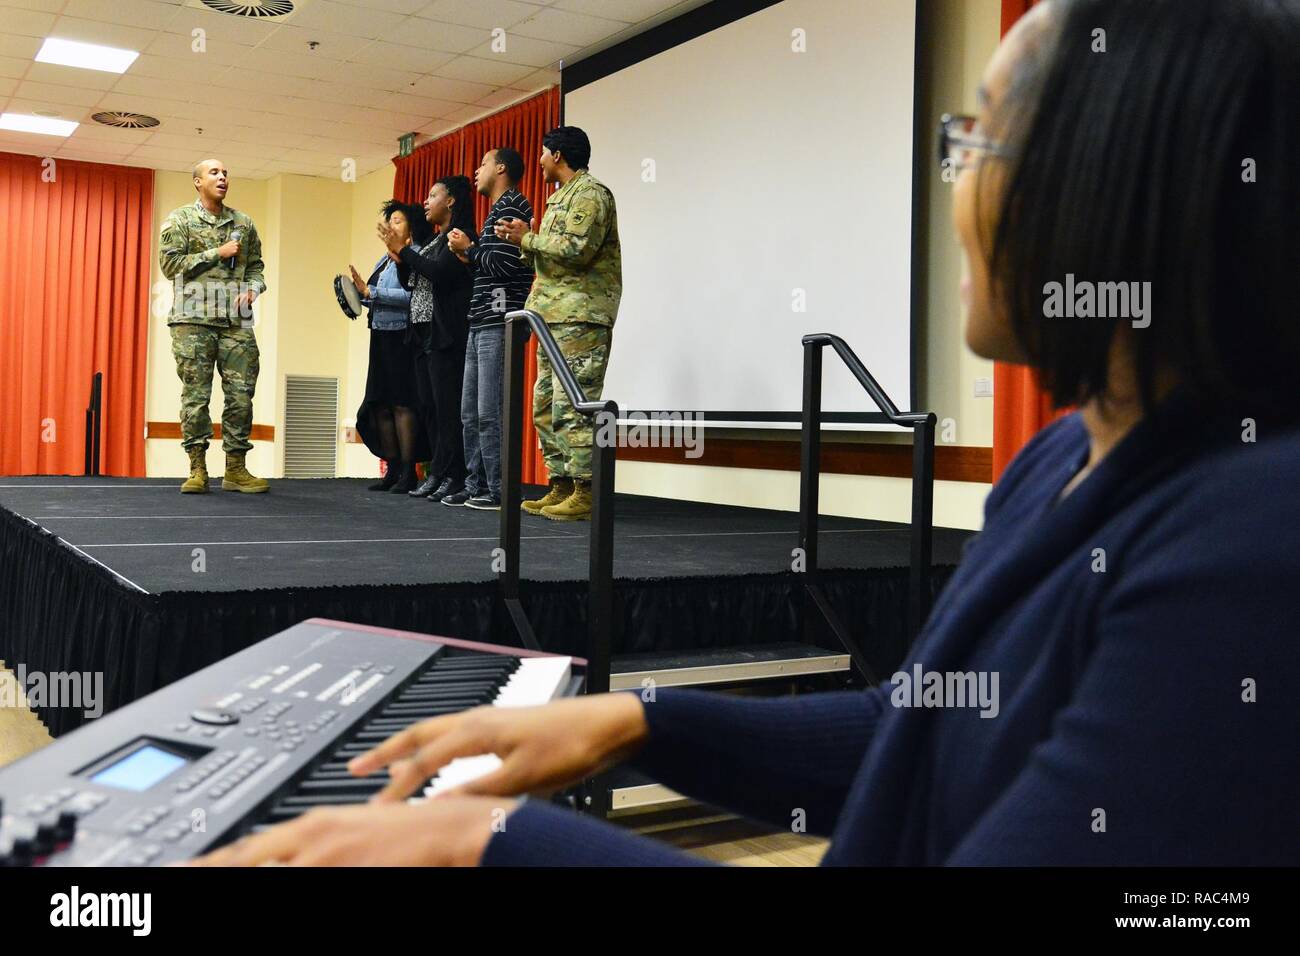 Gospel Service Choir of the Vicenza community, performs during Martin Luther King, Jr. Day observances, at Vicenza Military Community’s 2017 Observance Ceremony at Caserma Ederle, Vicenza, Italy, Jan. 10, 2017. Stock Photo